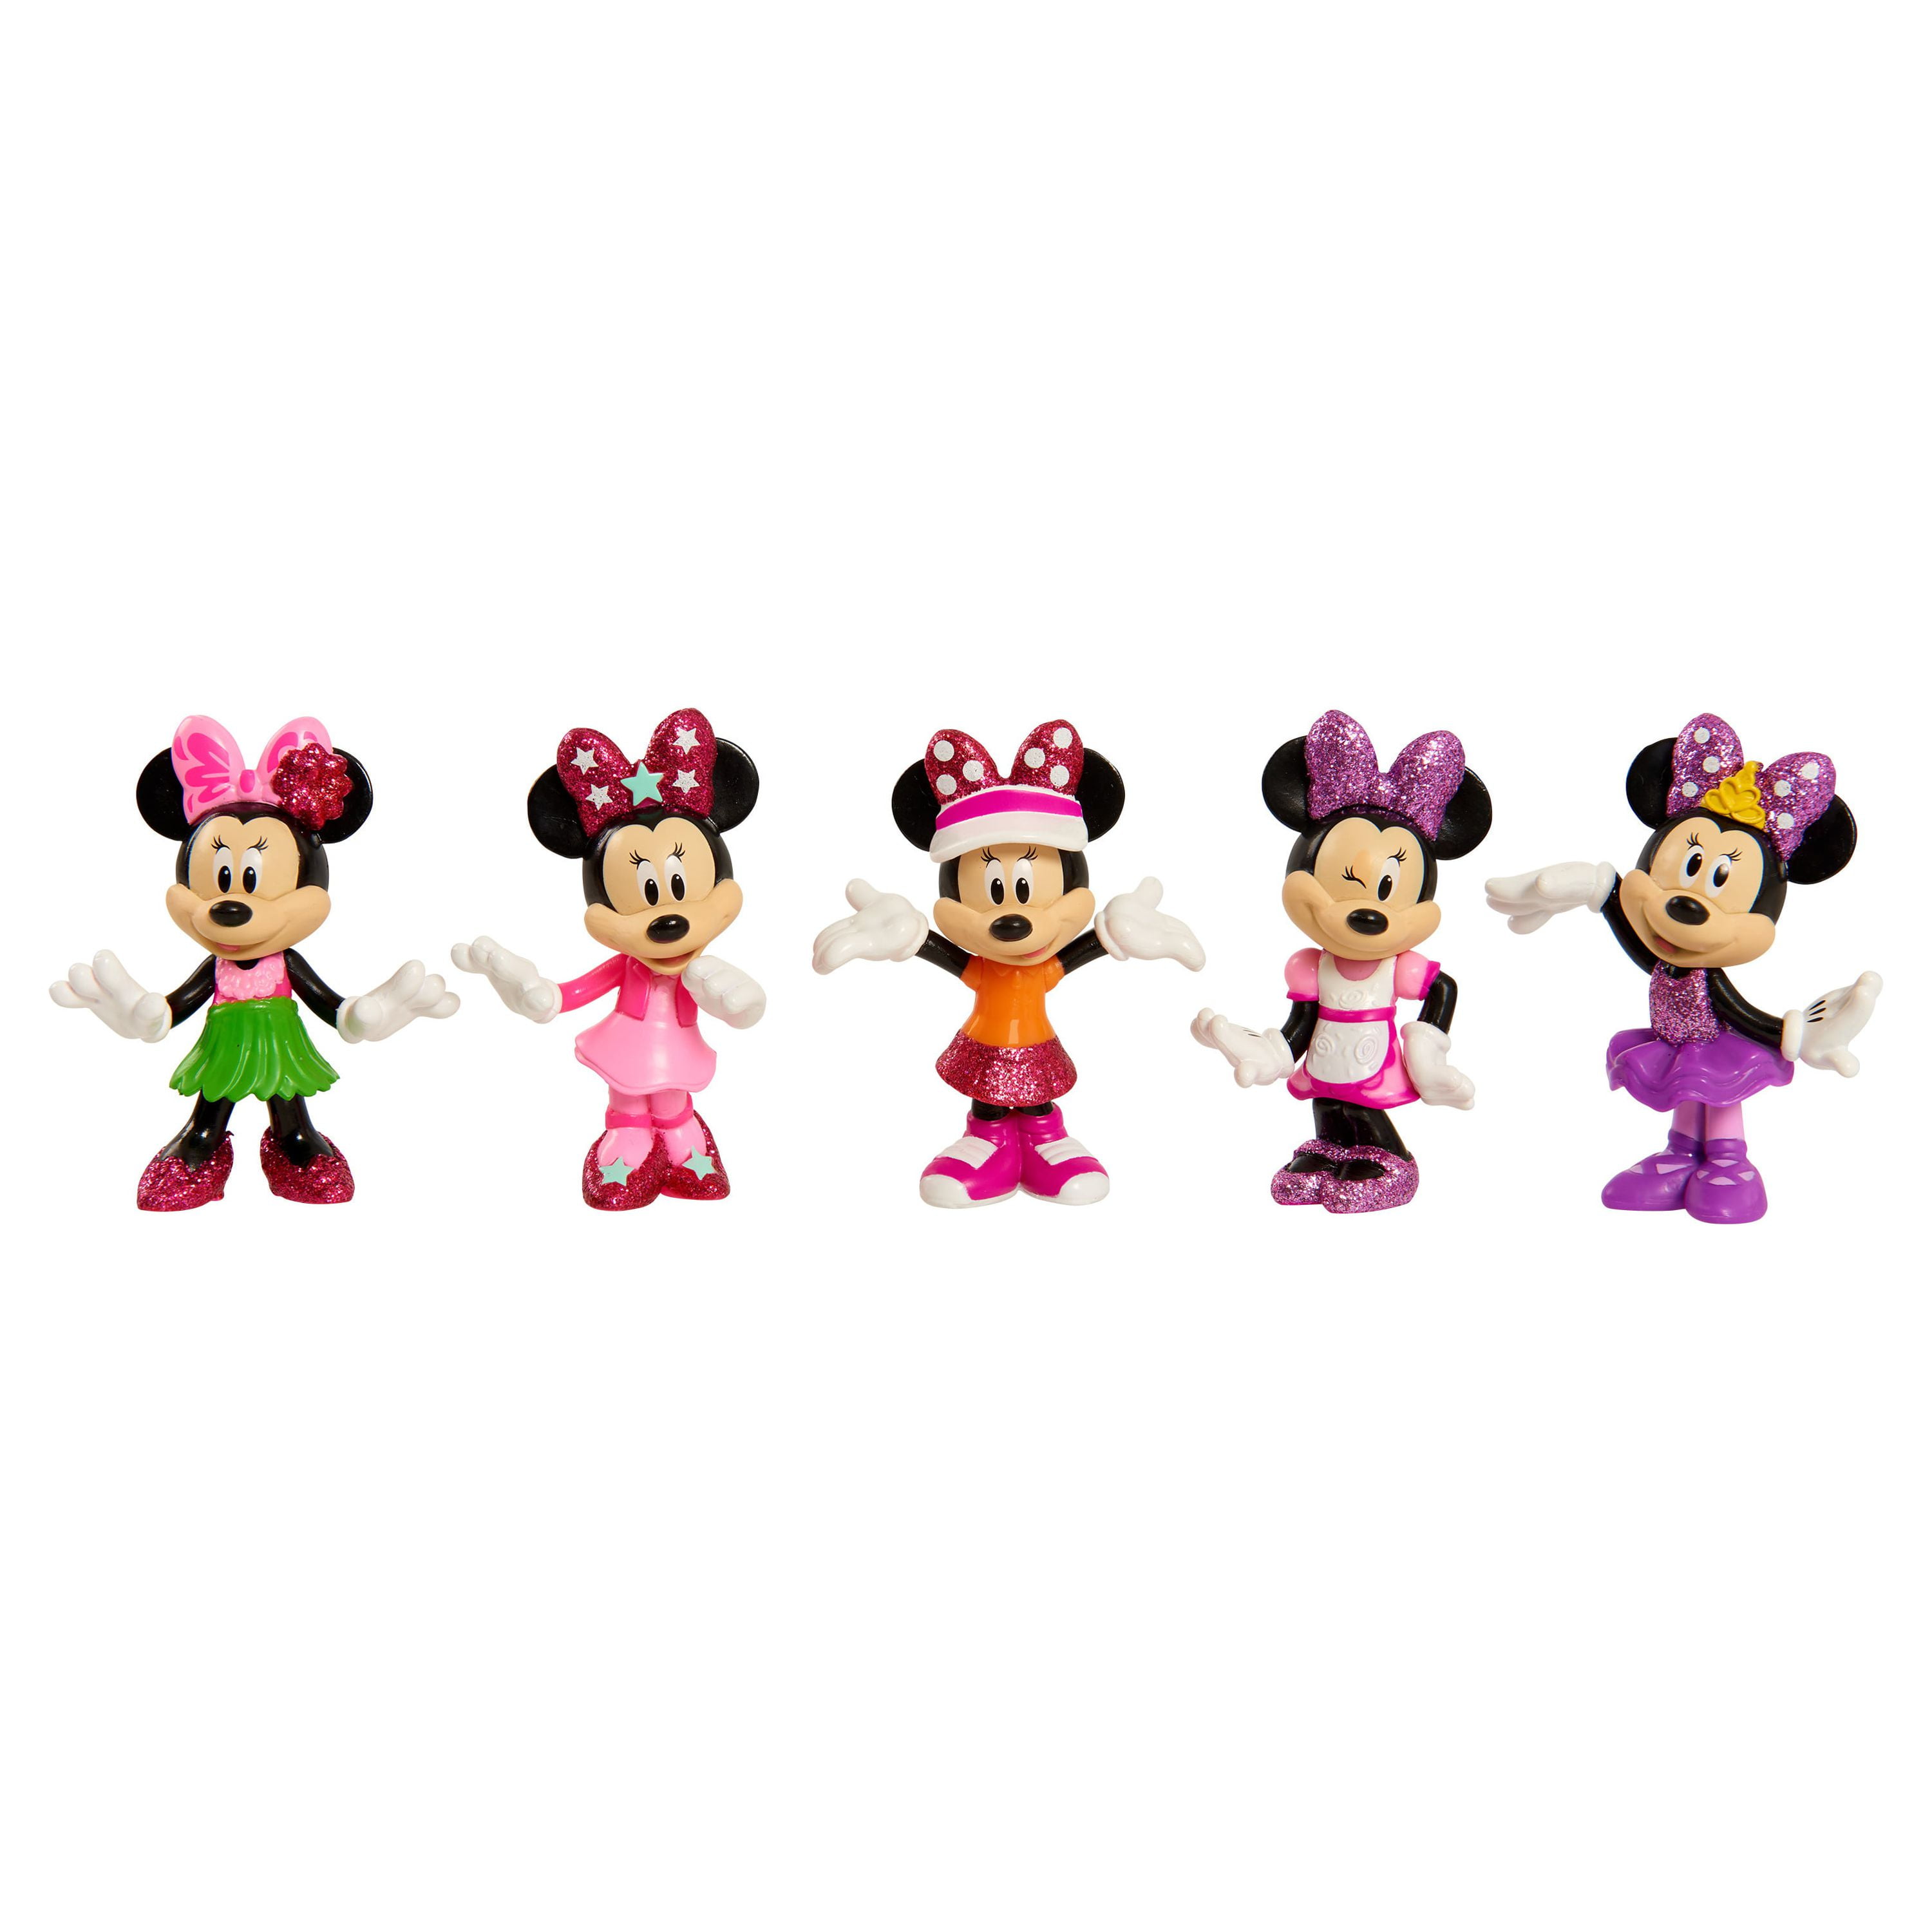 Disney Junior Minnie Mouse 3-inch Collectible Figure Set, 5 Piece Set,  Officially Licensed Kids Toys for Ages 3 Up by Just Play